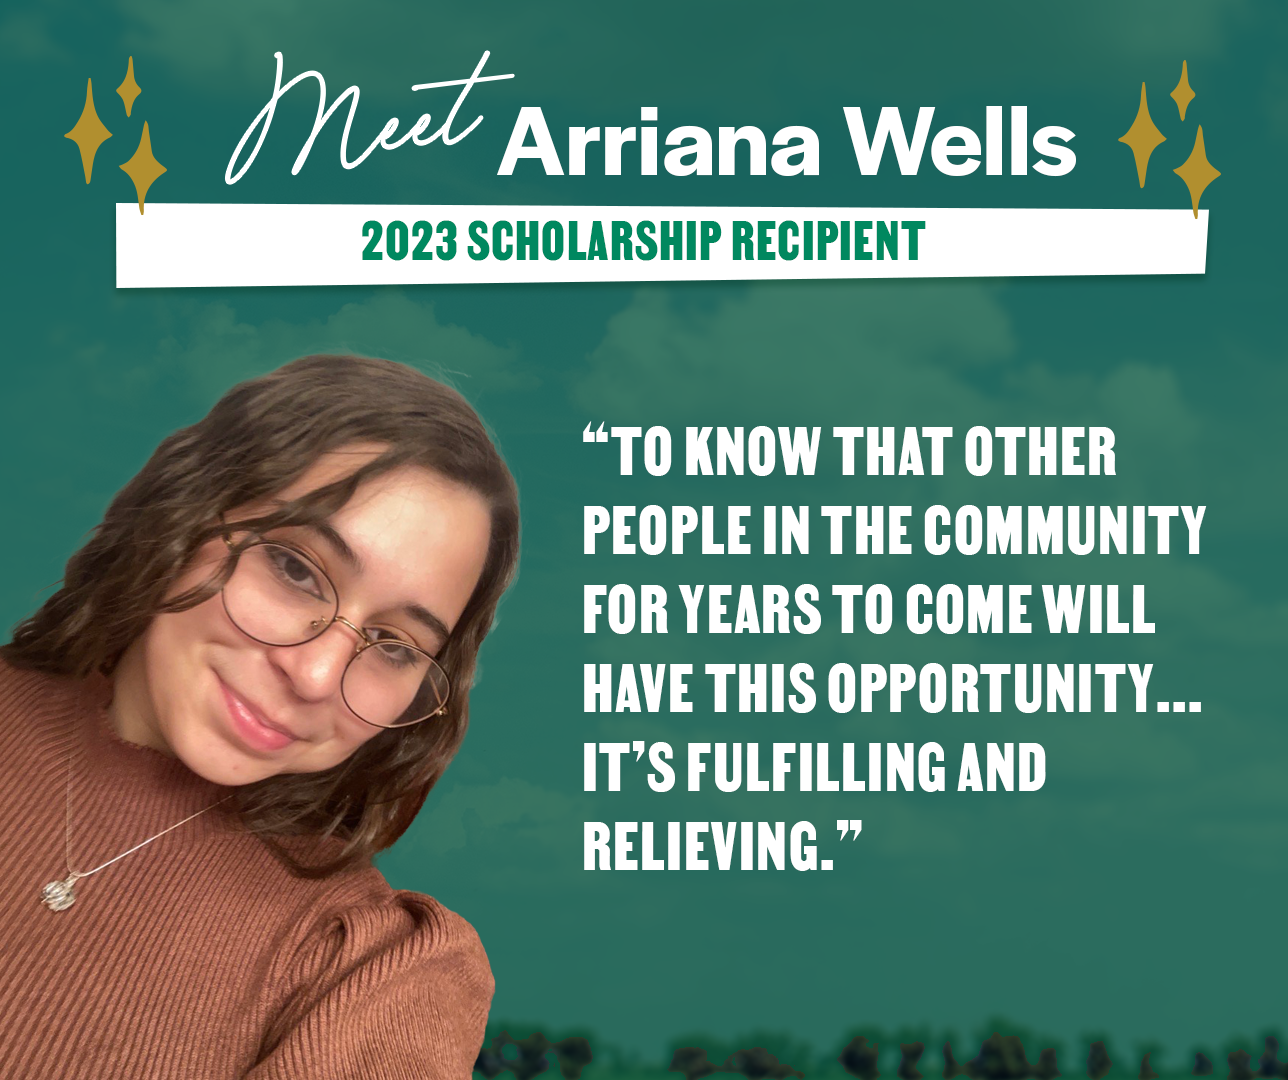 Meet Arriana Wells: 2023 Scholarship Recipient 'To know that other people in the community for years to come will have this opportunity... it's fulfilling and relieving.'